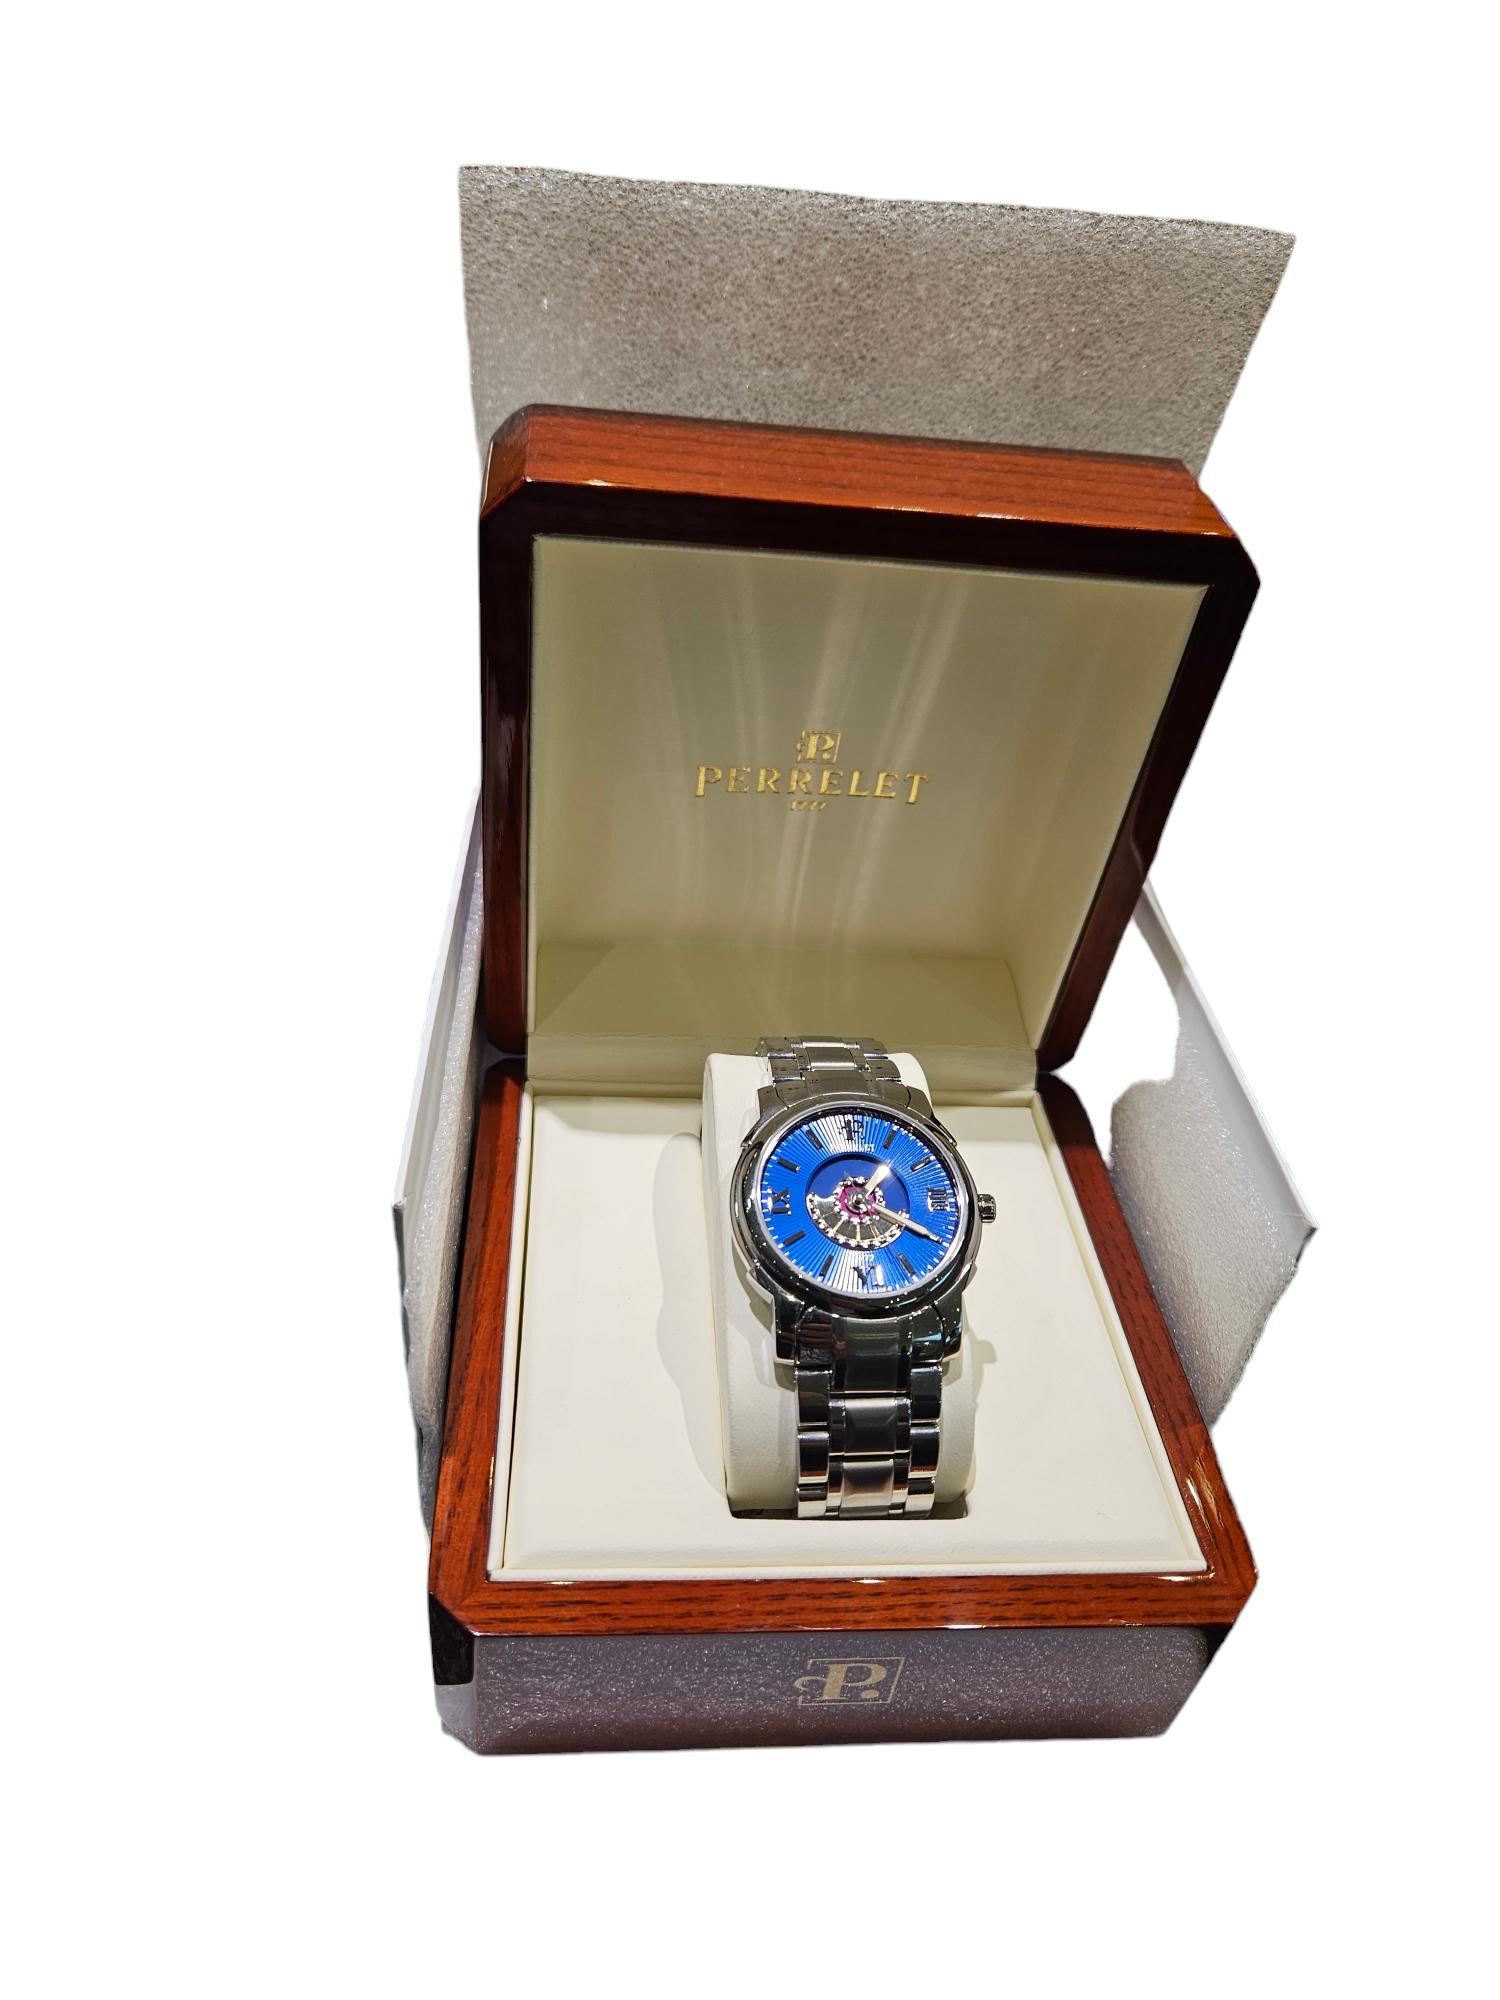 Perrelet Antartica James Cook Limited Edition Wrist Watch For Sale 10